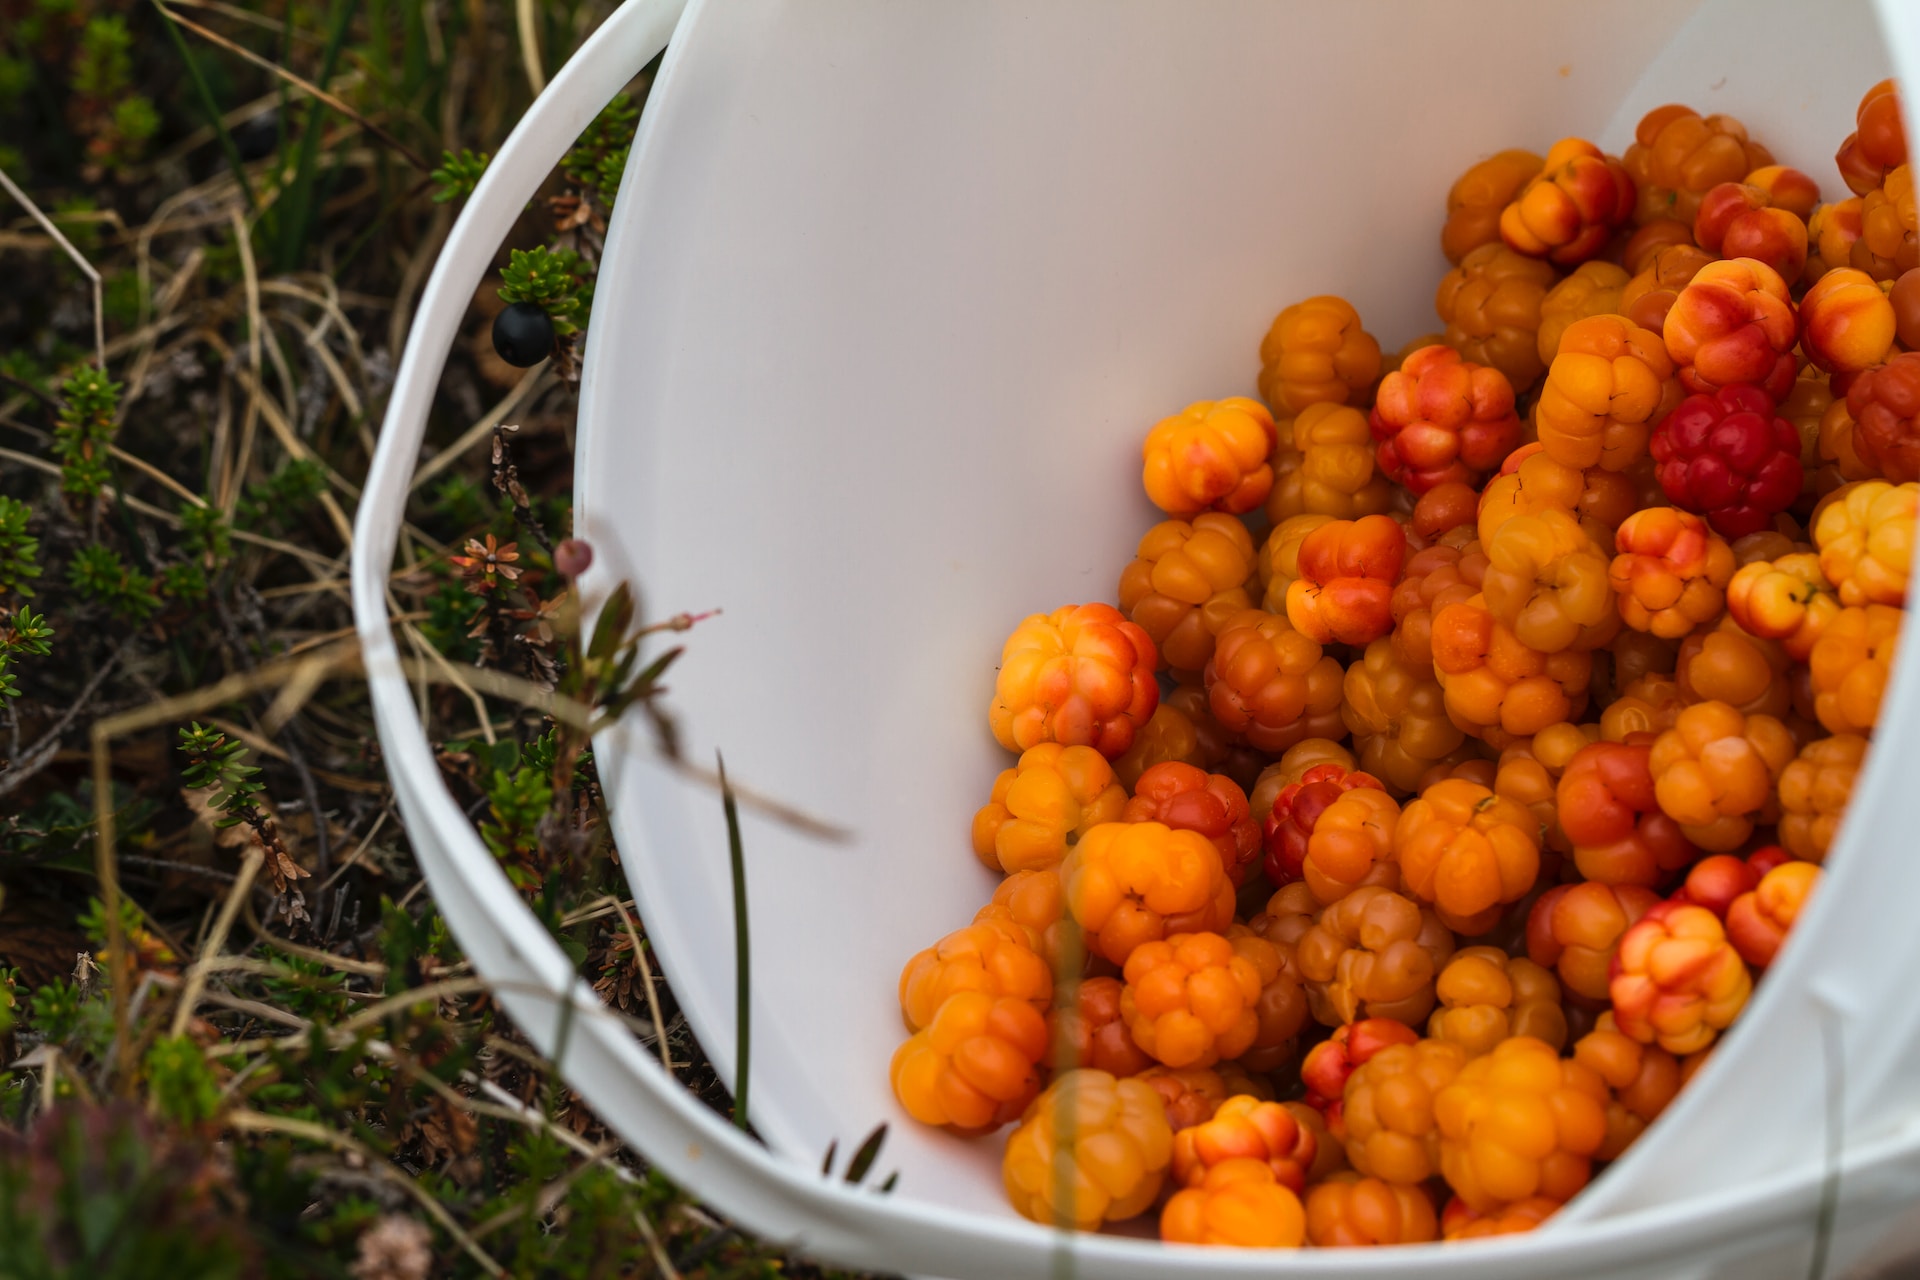 Pictured is a bucket of cloudberries. 